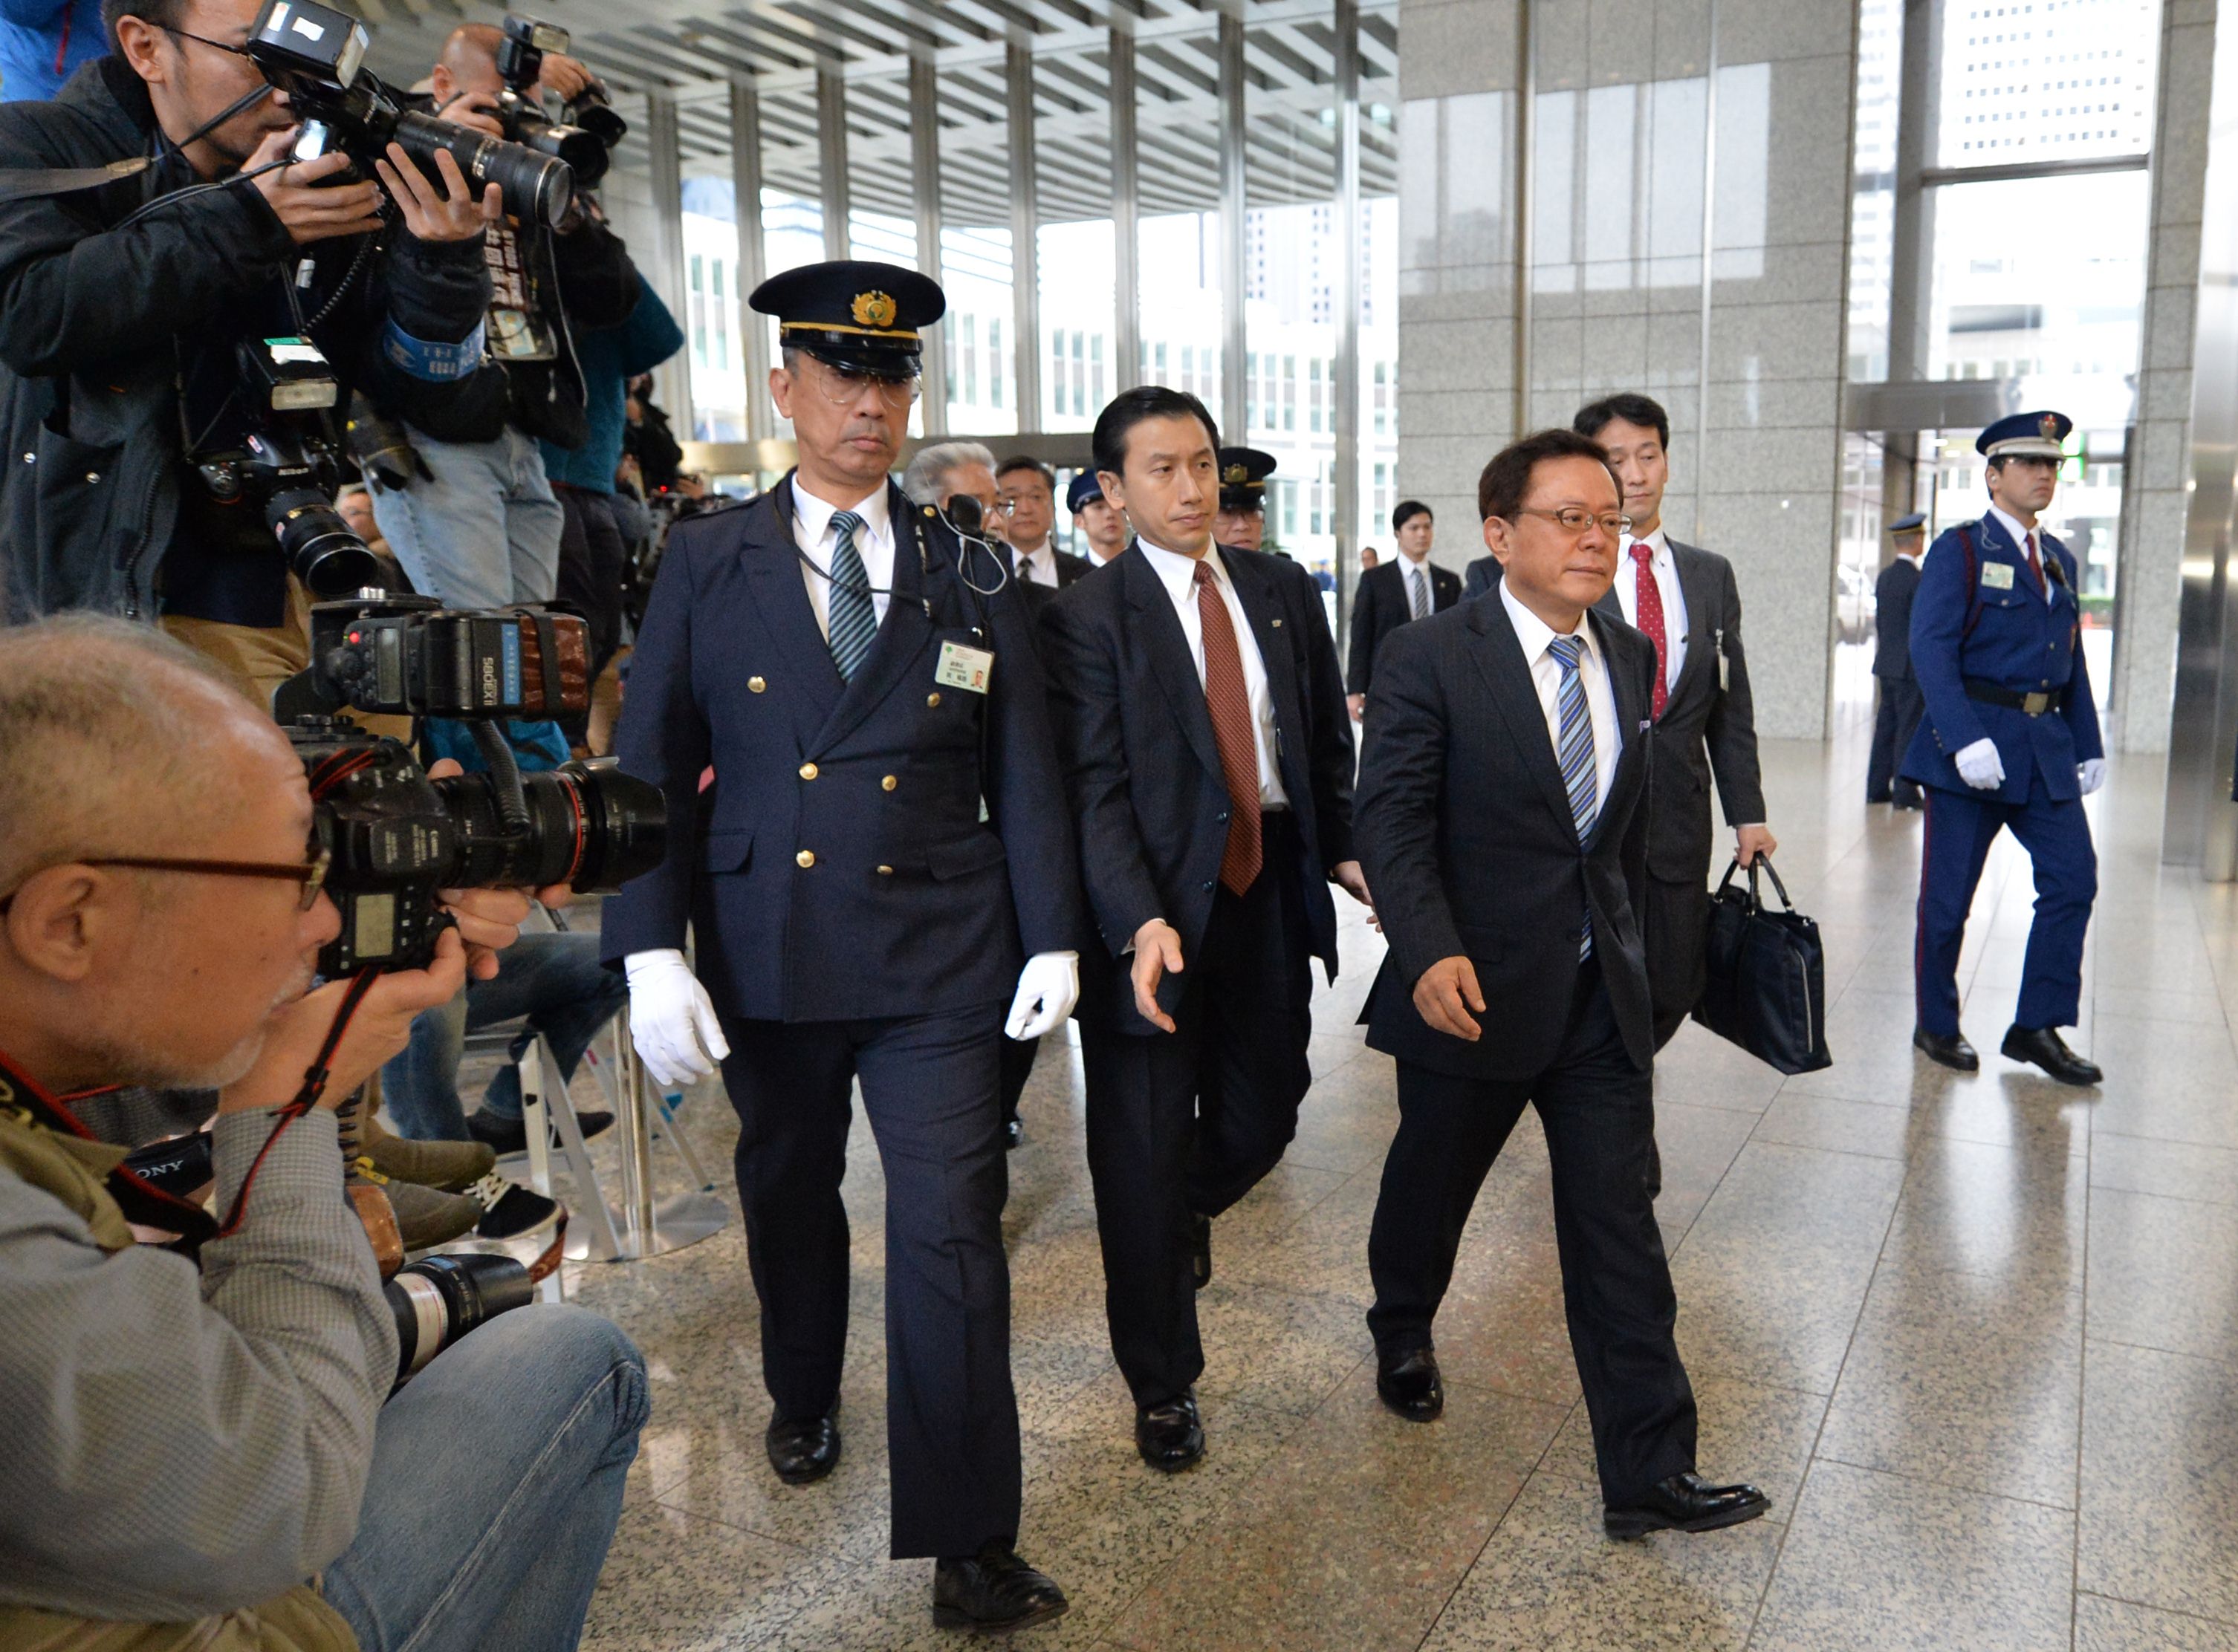 Tokyo governor Naoki Inose (front right) has resigned after admitted receiving US$500,000 from a hospital tycoon. Photo: AFP